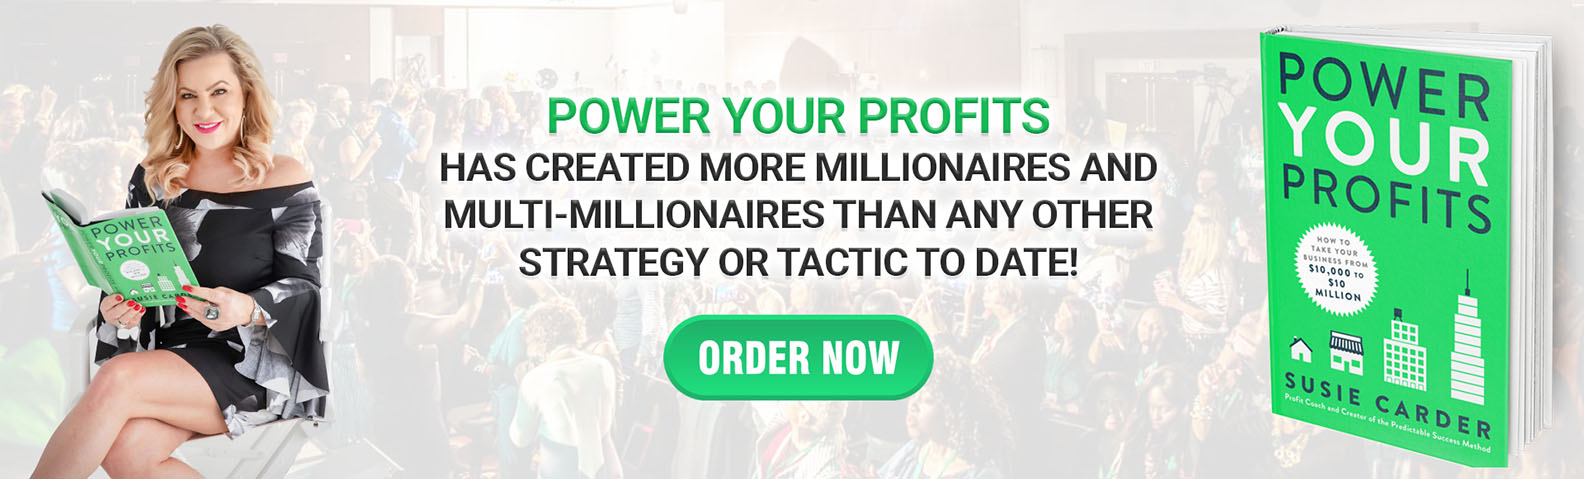 power-your-profits-book-order-now